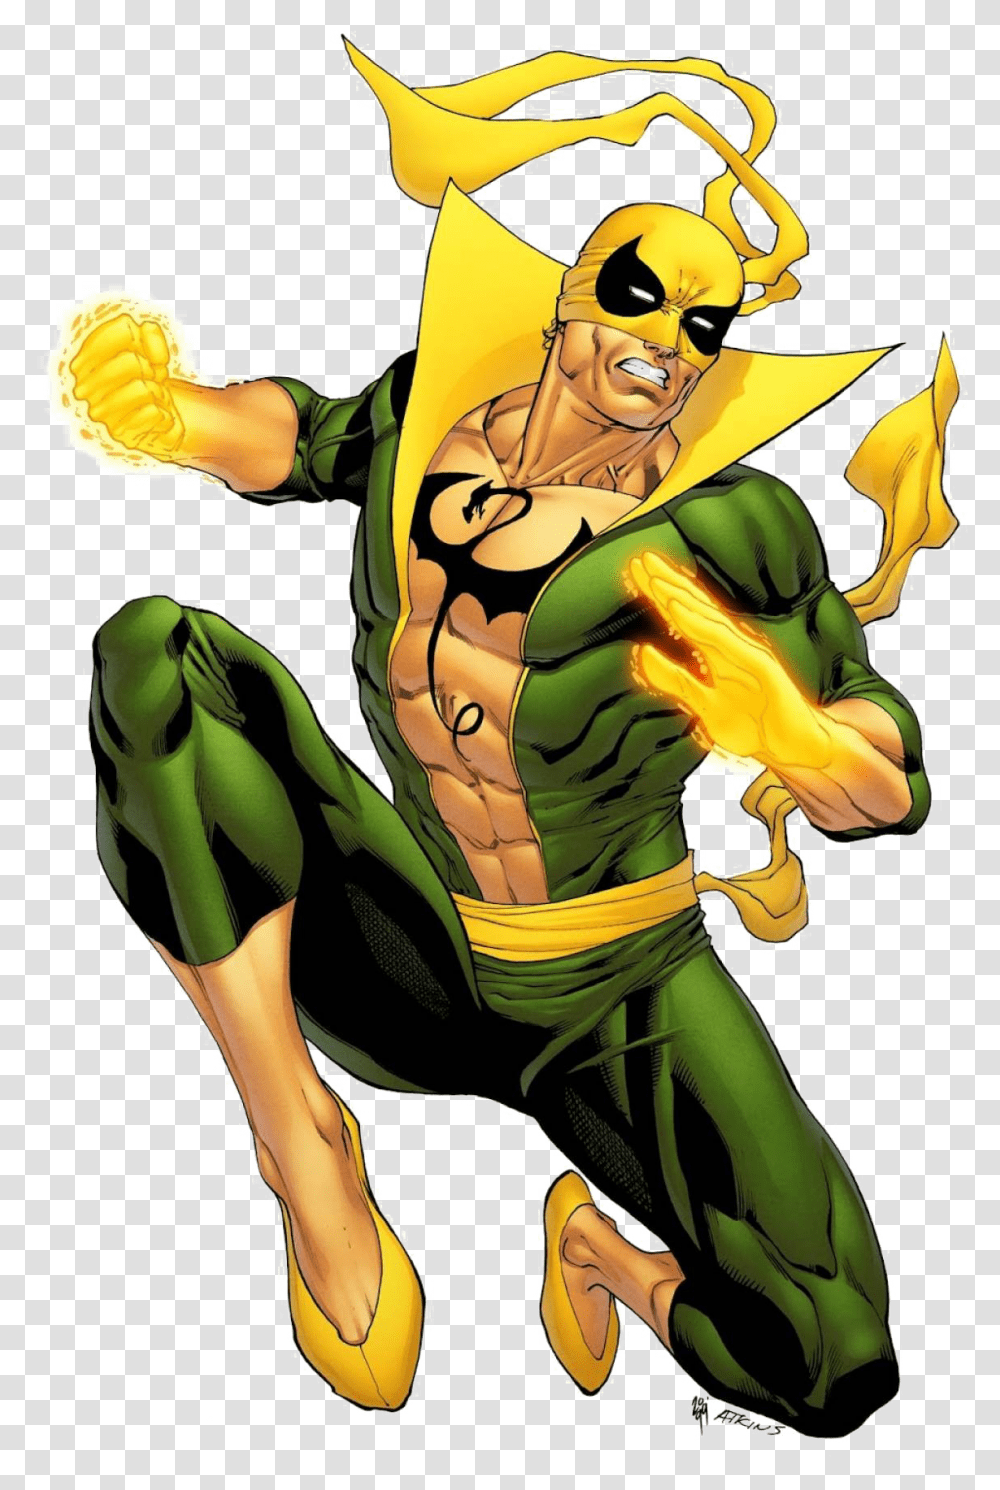 Iron Fist Image Background Iron Fist Marvel, Hand, Person Transparent Png